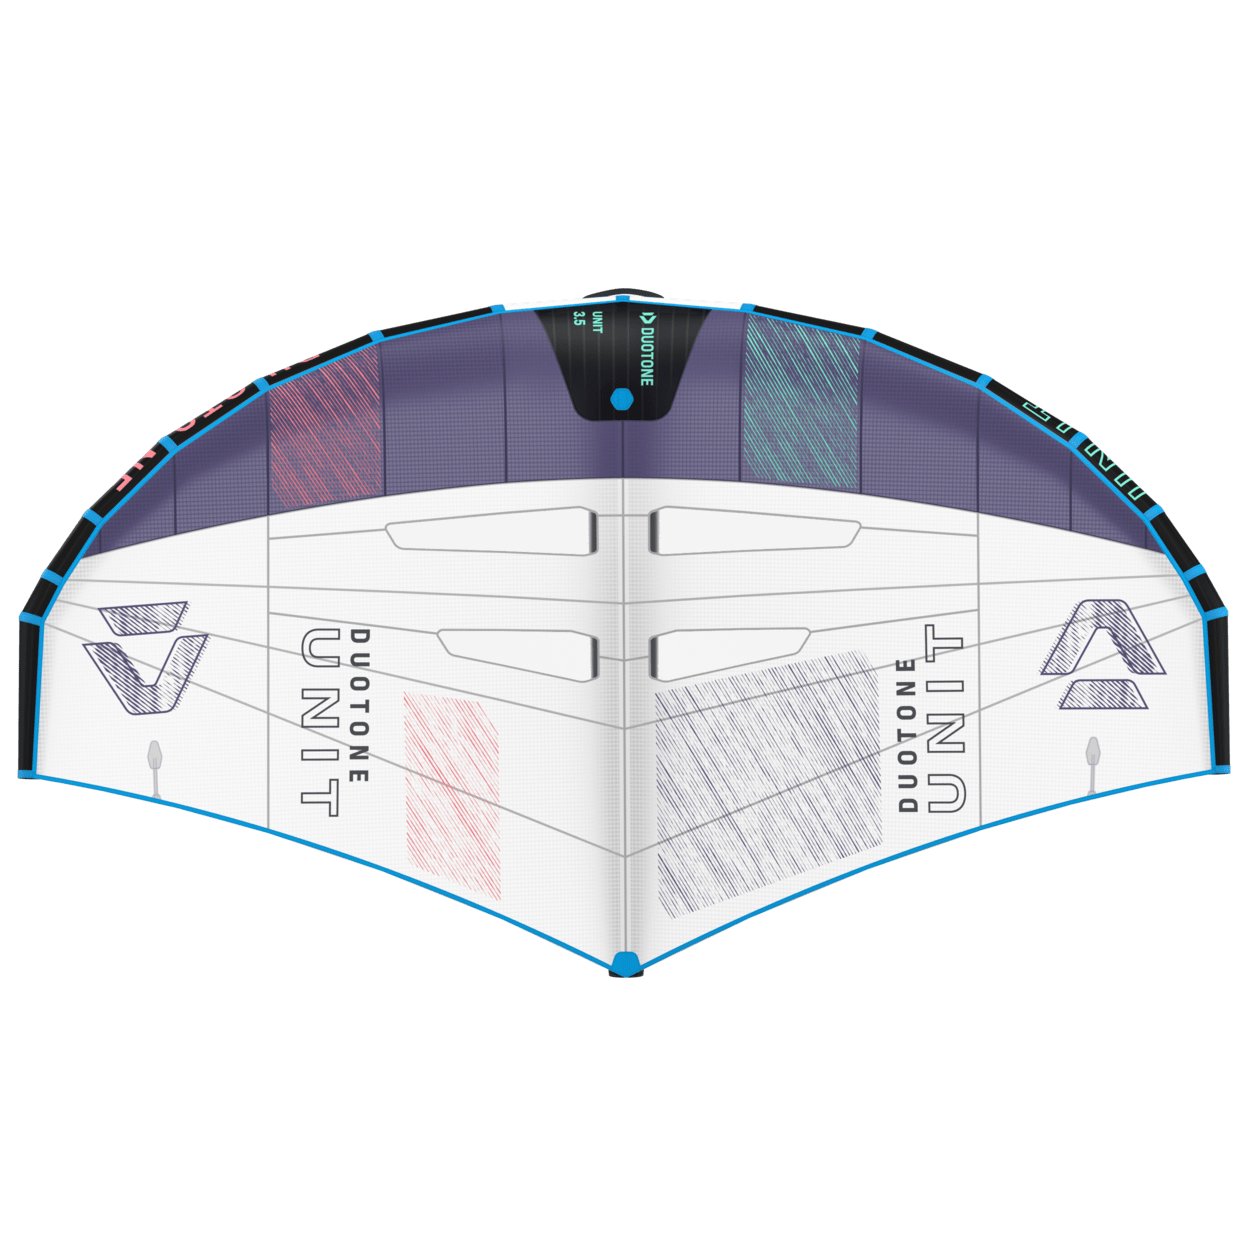 Duotone Foil Wing Unit 2023 - Worthing Watersports - 9010583139579 - Foilwing - Duotone X